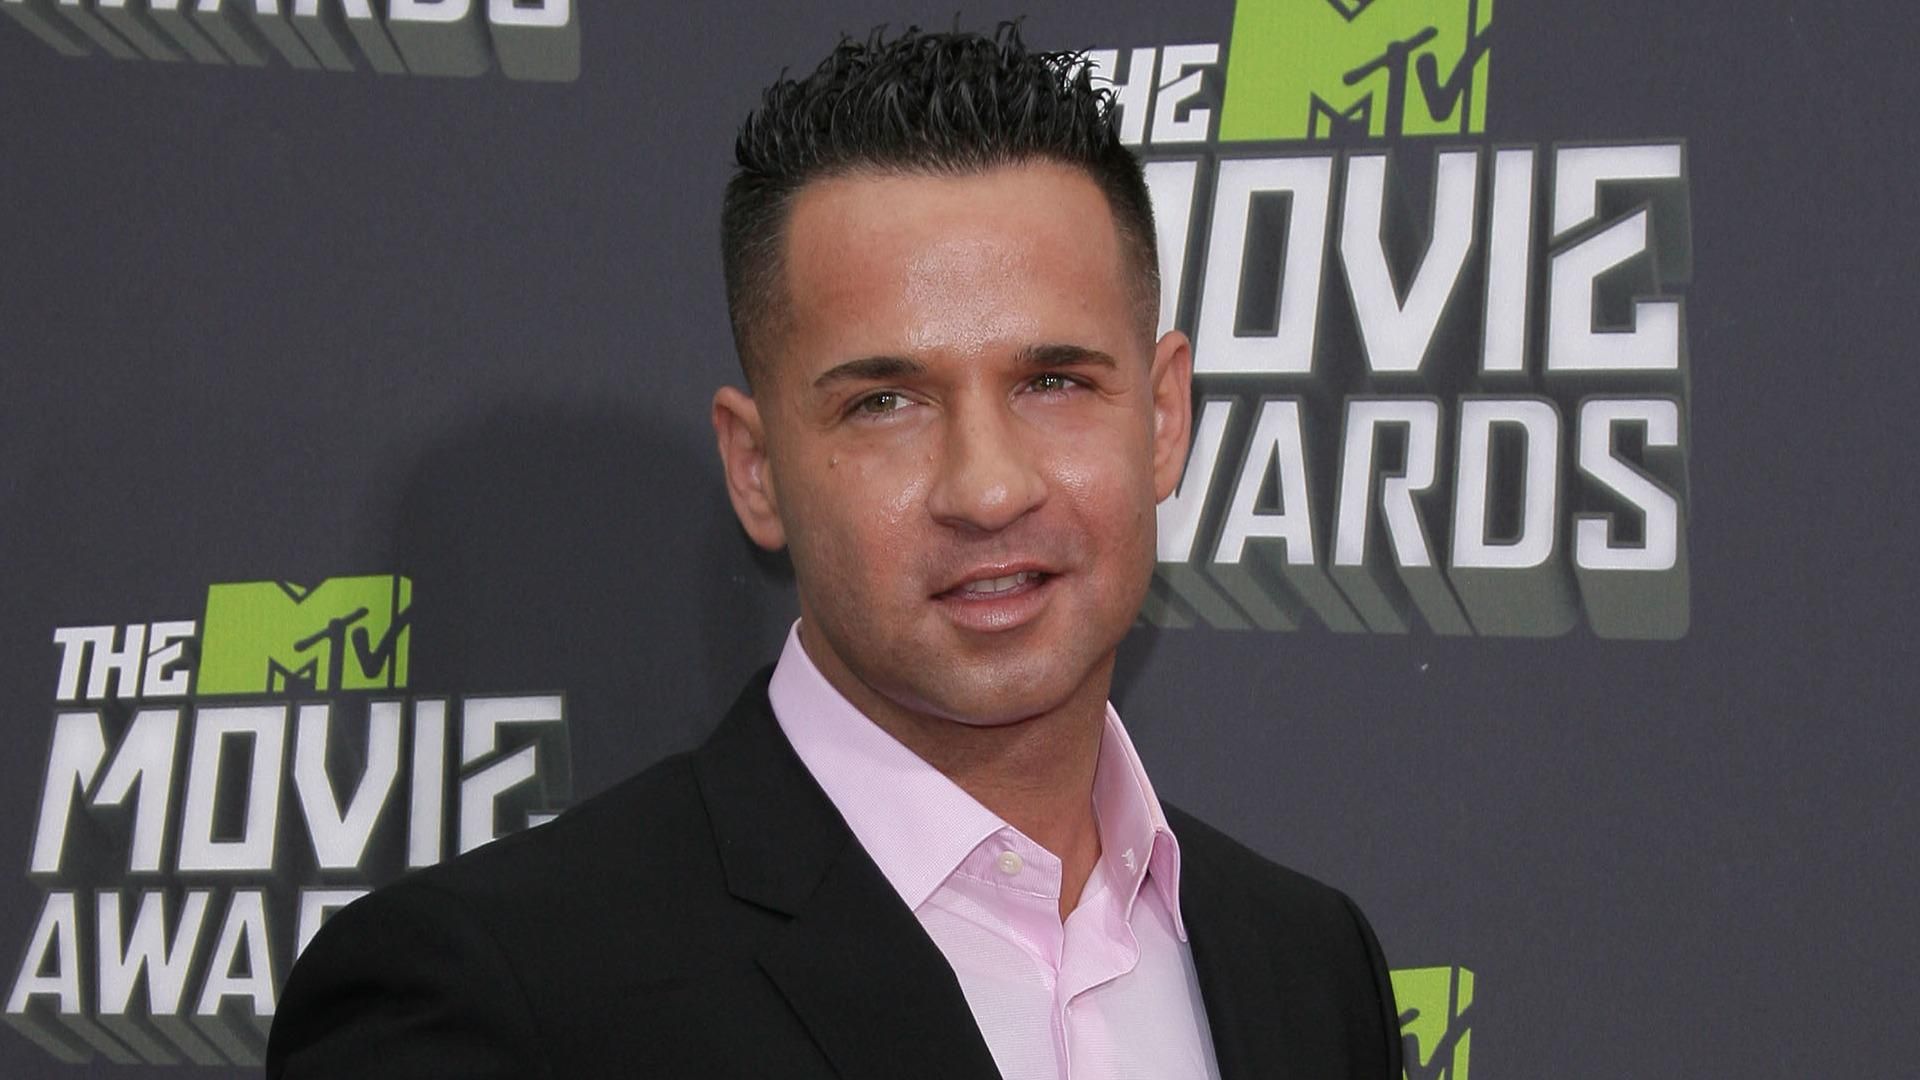 Mike The Situation Reality TV Jerk